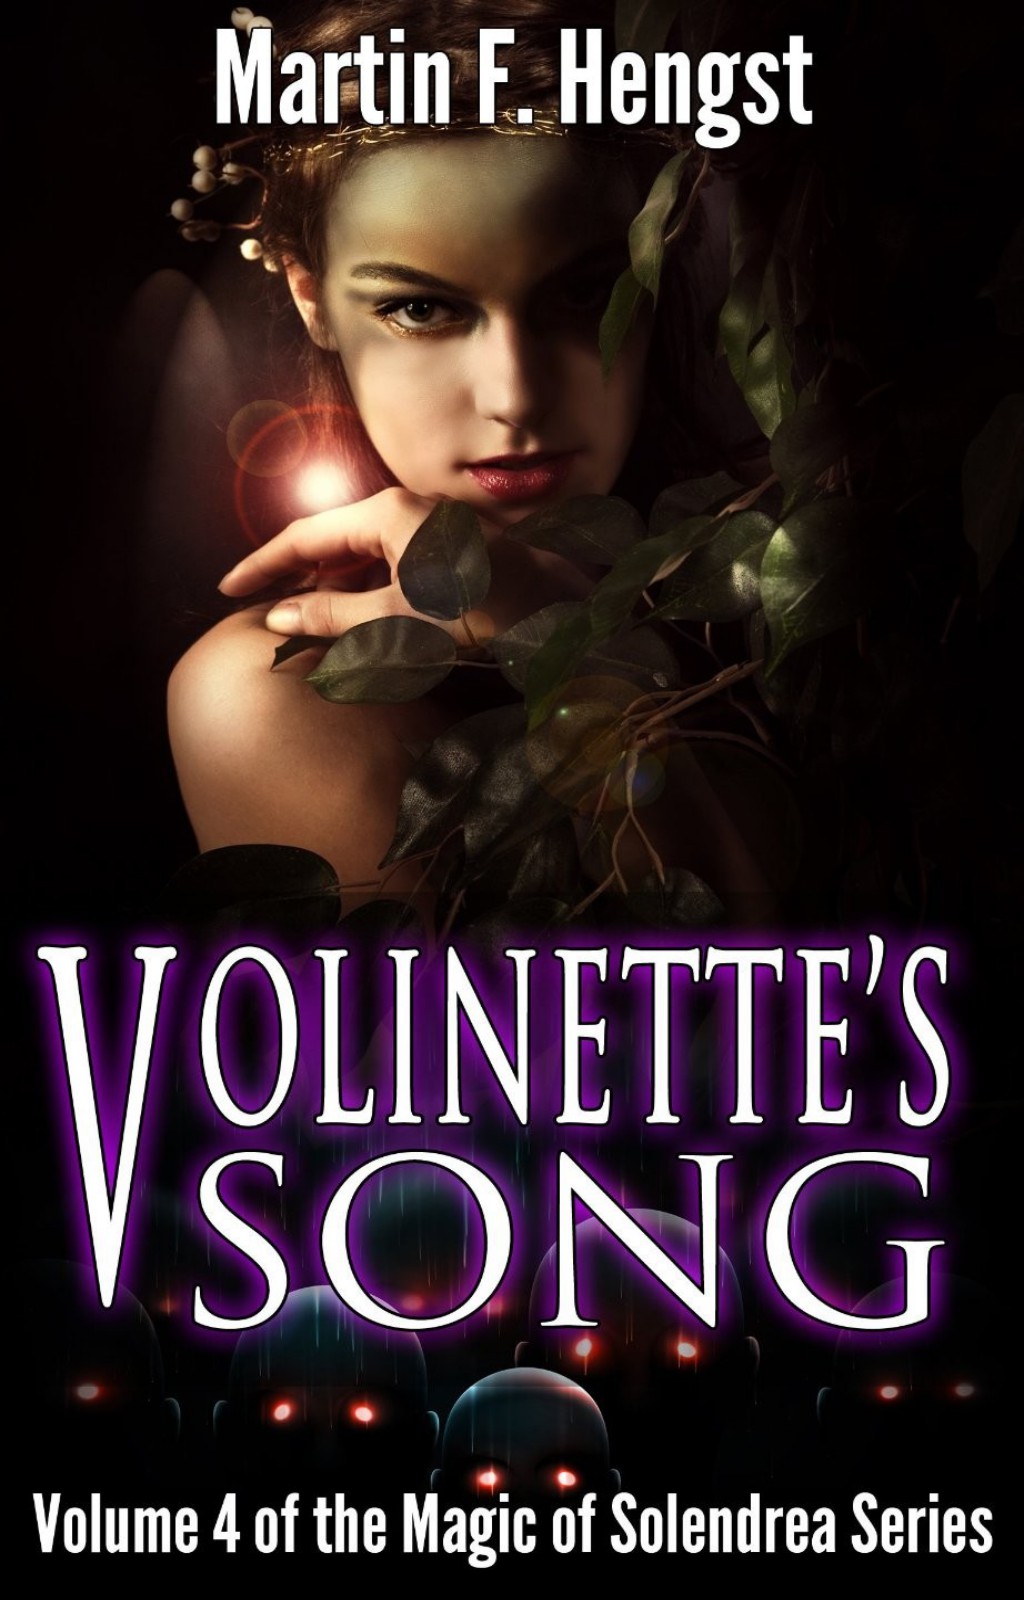 Volinette's Song by Martin Hengst